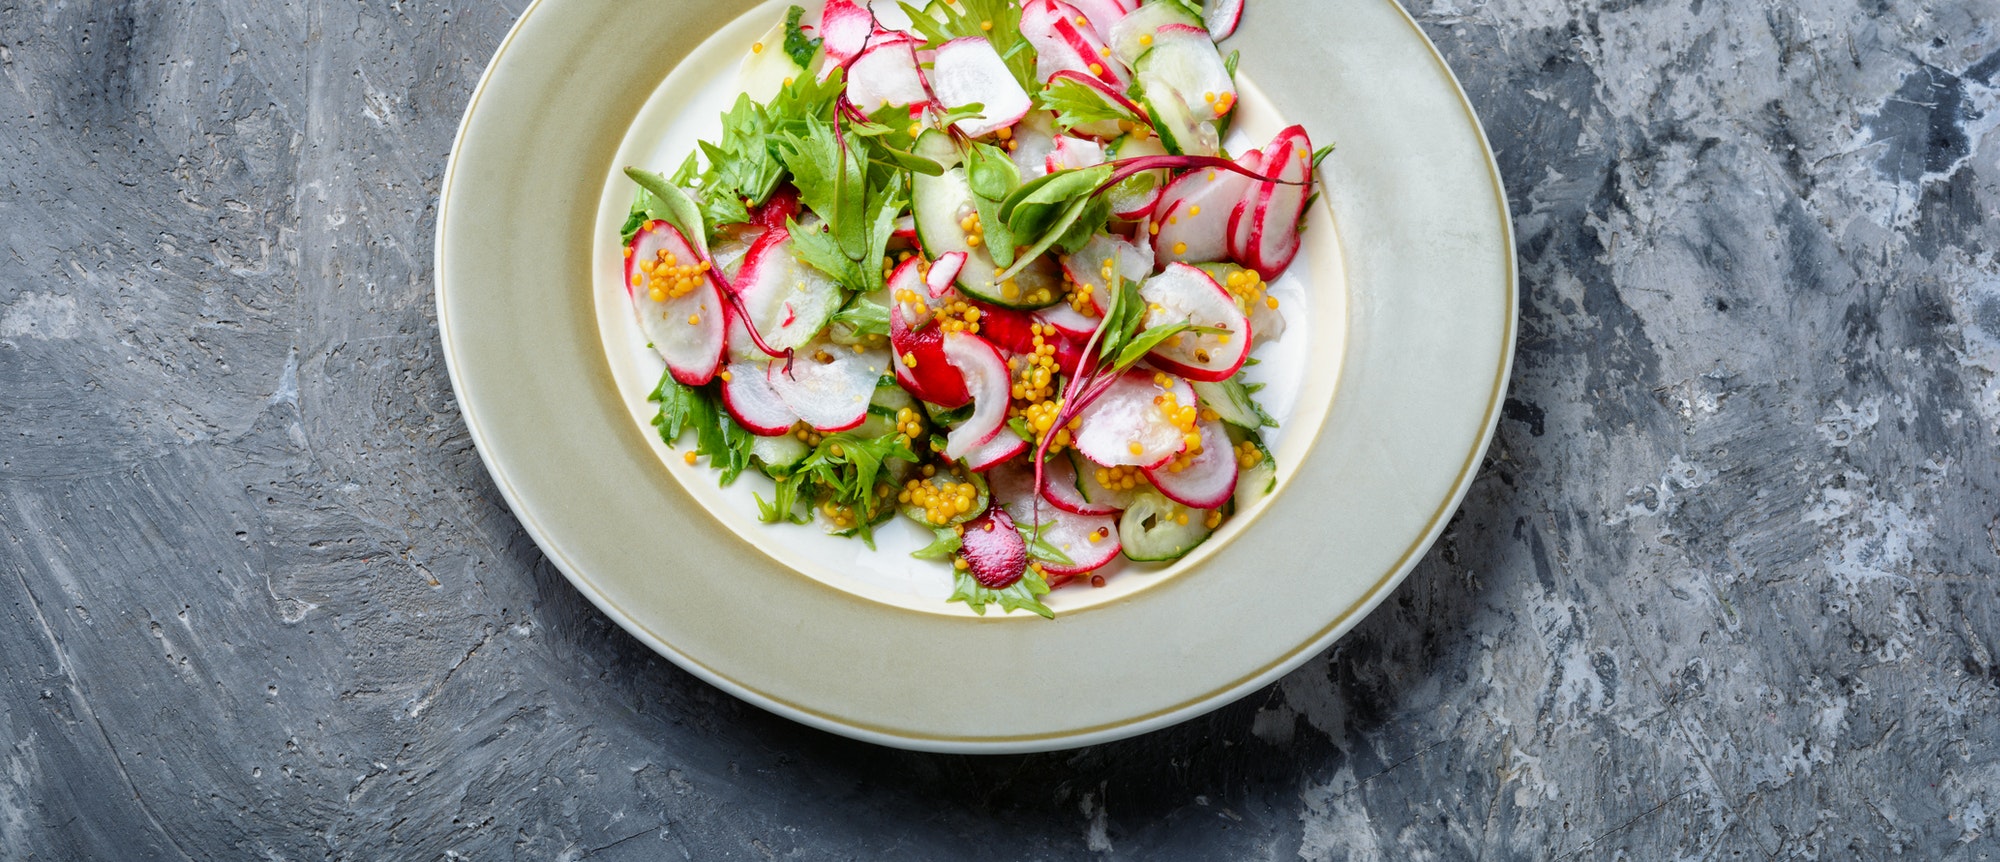 Delicious spring salad with radishes